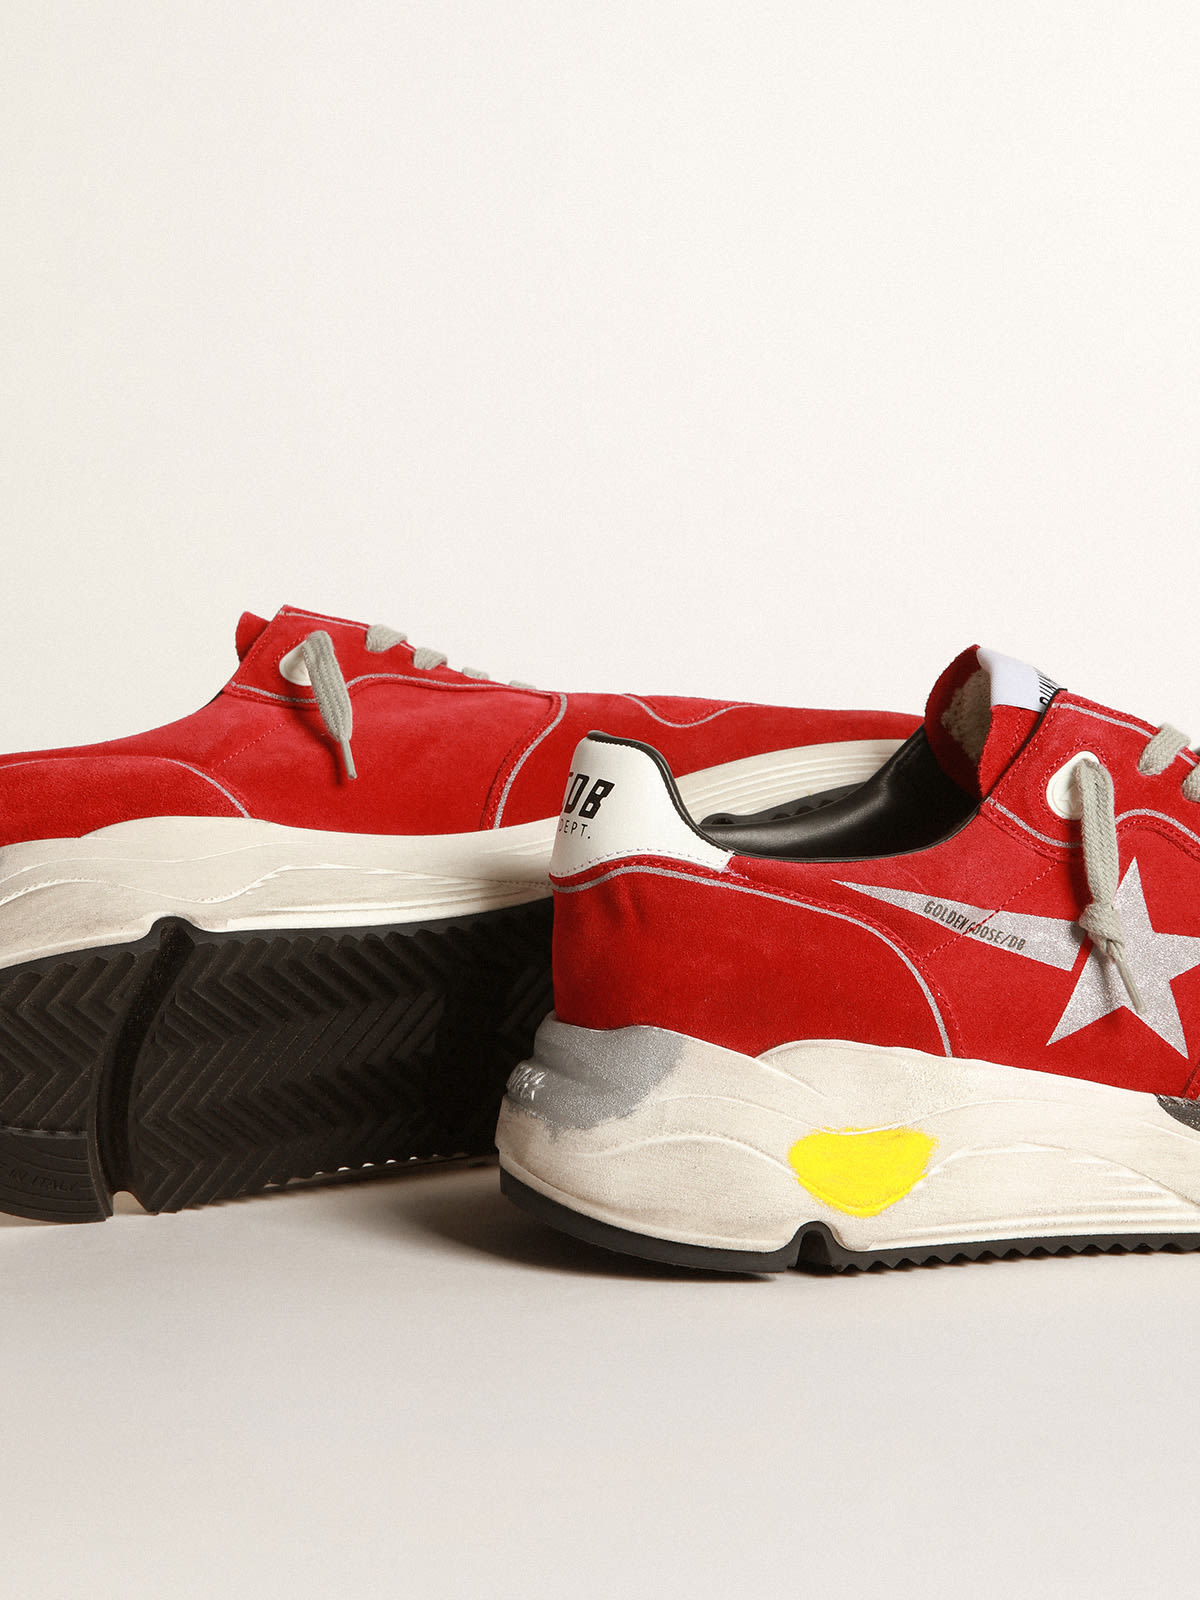 Golden Goose - Running Sole sneakers with contrast stitching in 